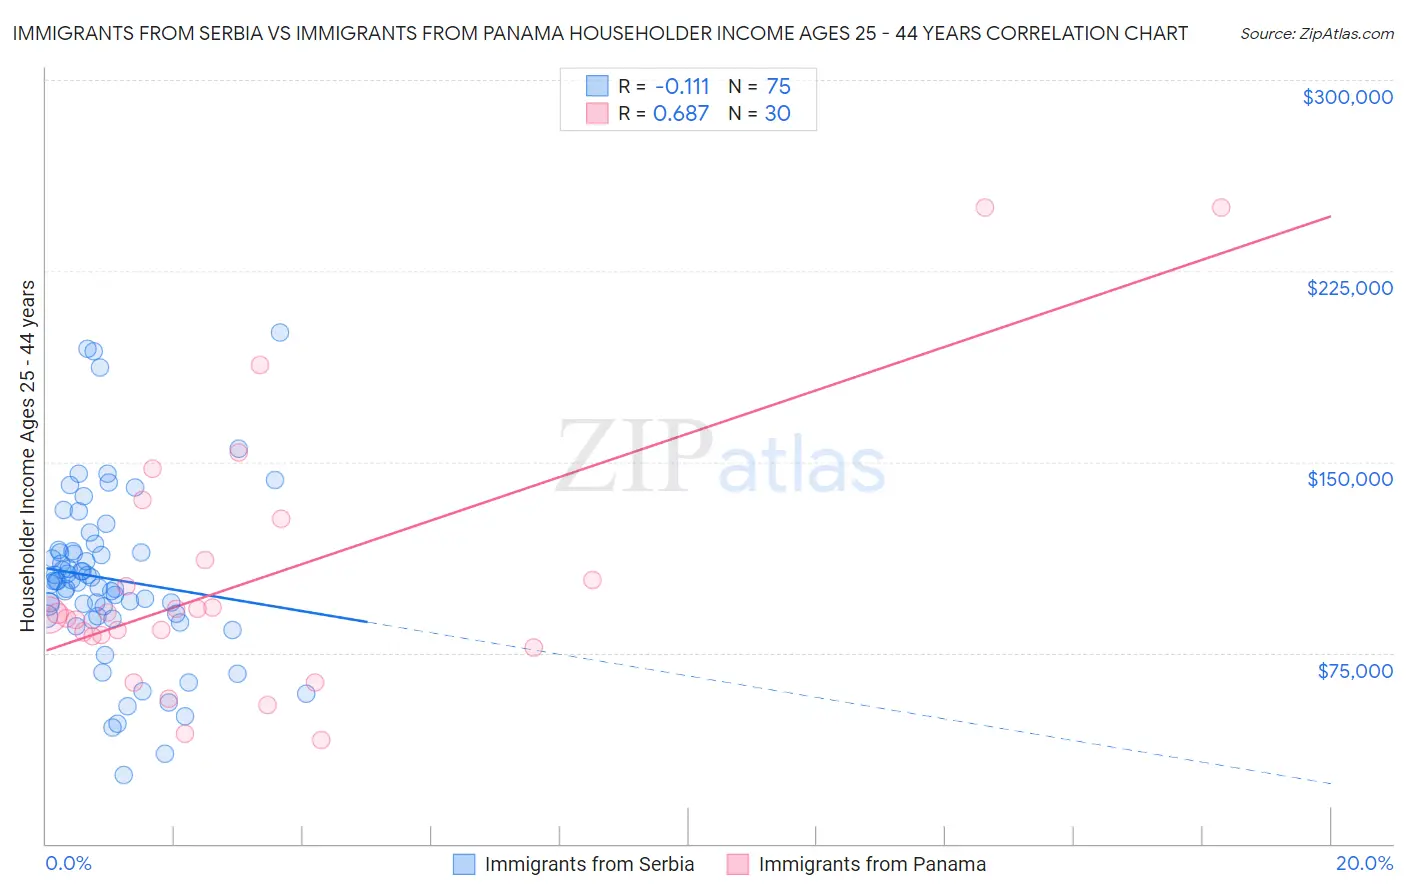 Immigrants from Serbia vs Immigrants from Panama Householder Income Ages 25 - 44 years